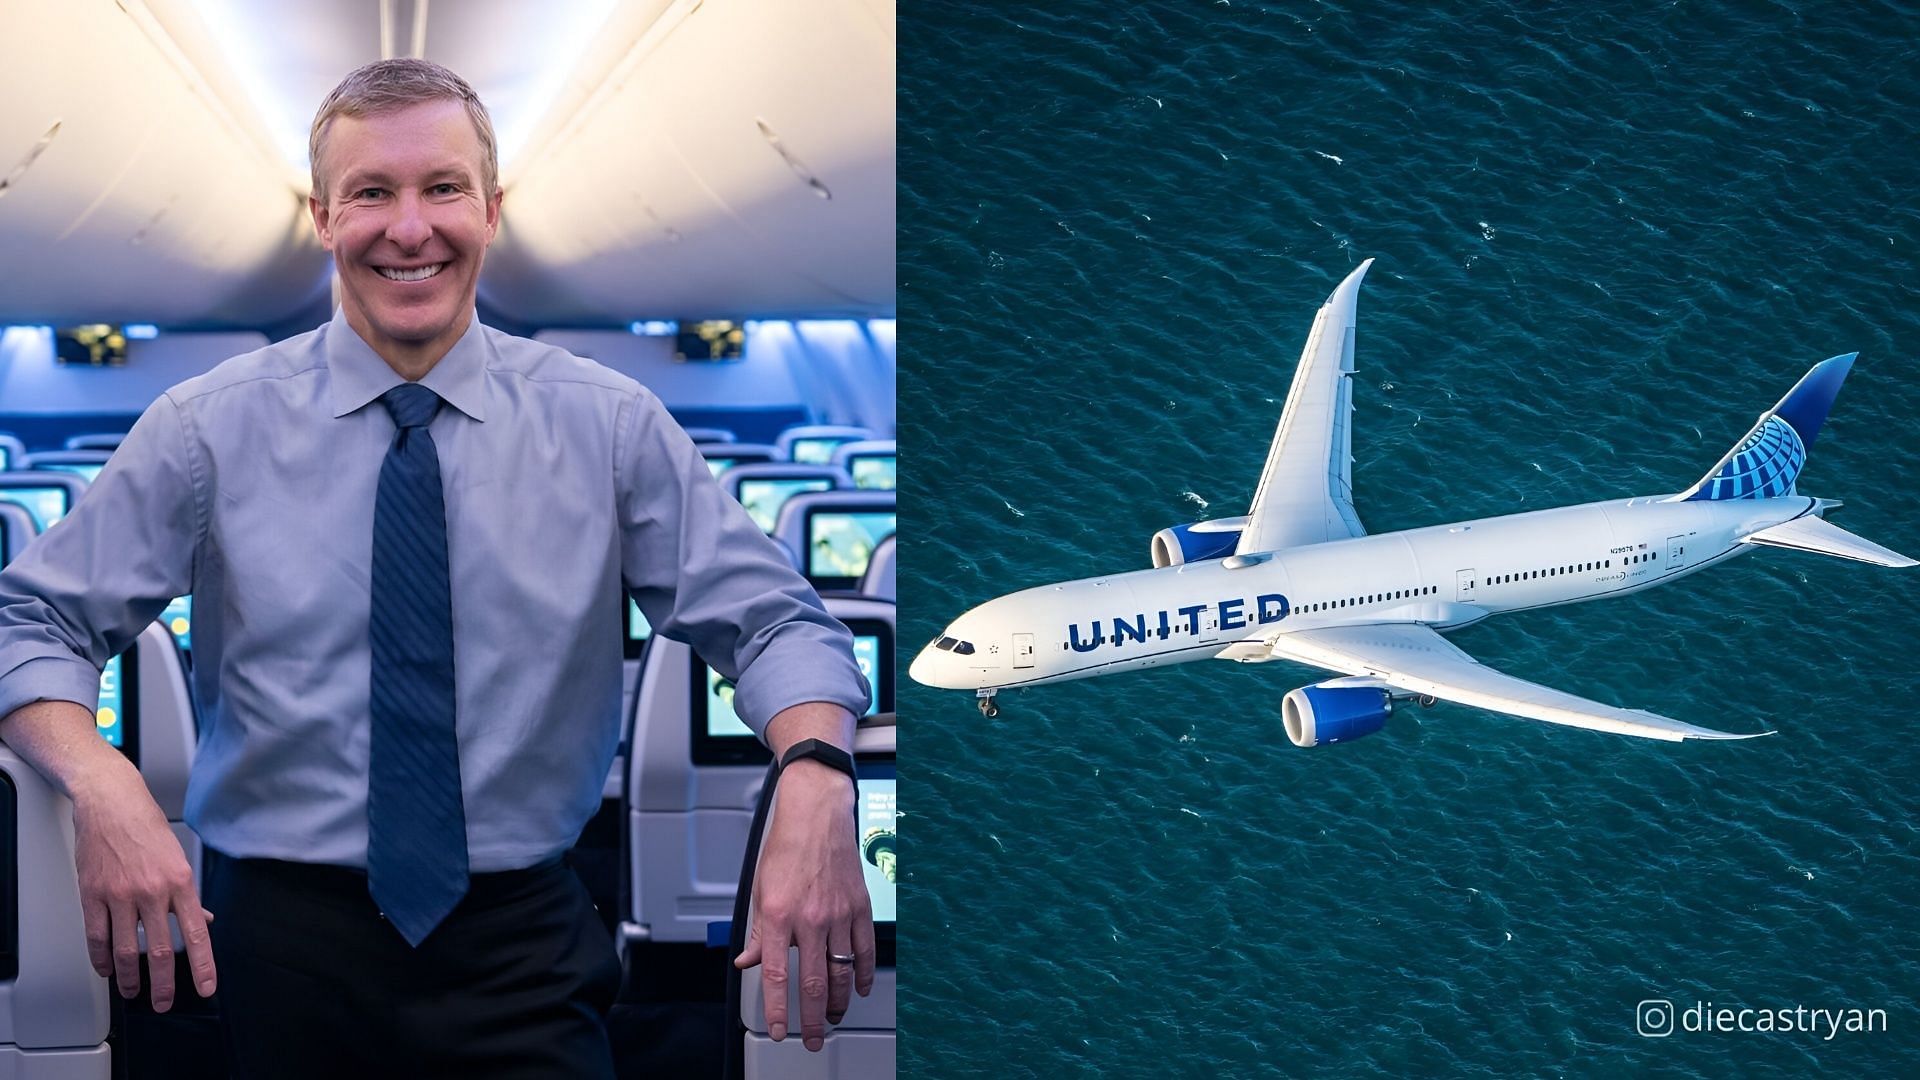 United Airlines CEO Scott Kirby faces criticism online over DEI video. (Image via Instagram/@scottkirby)